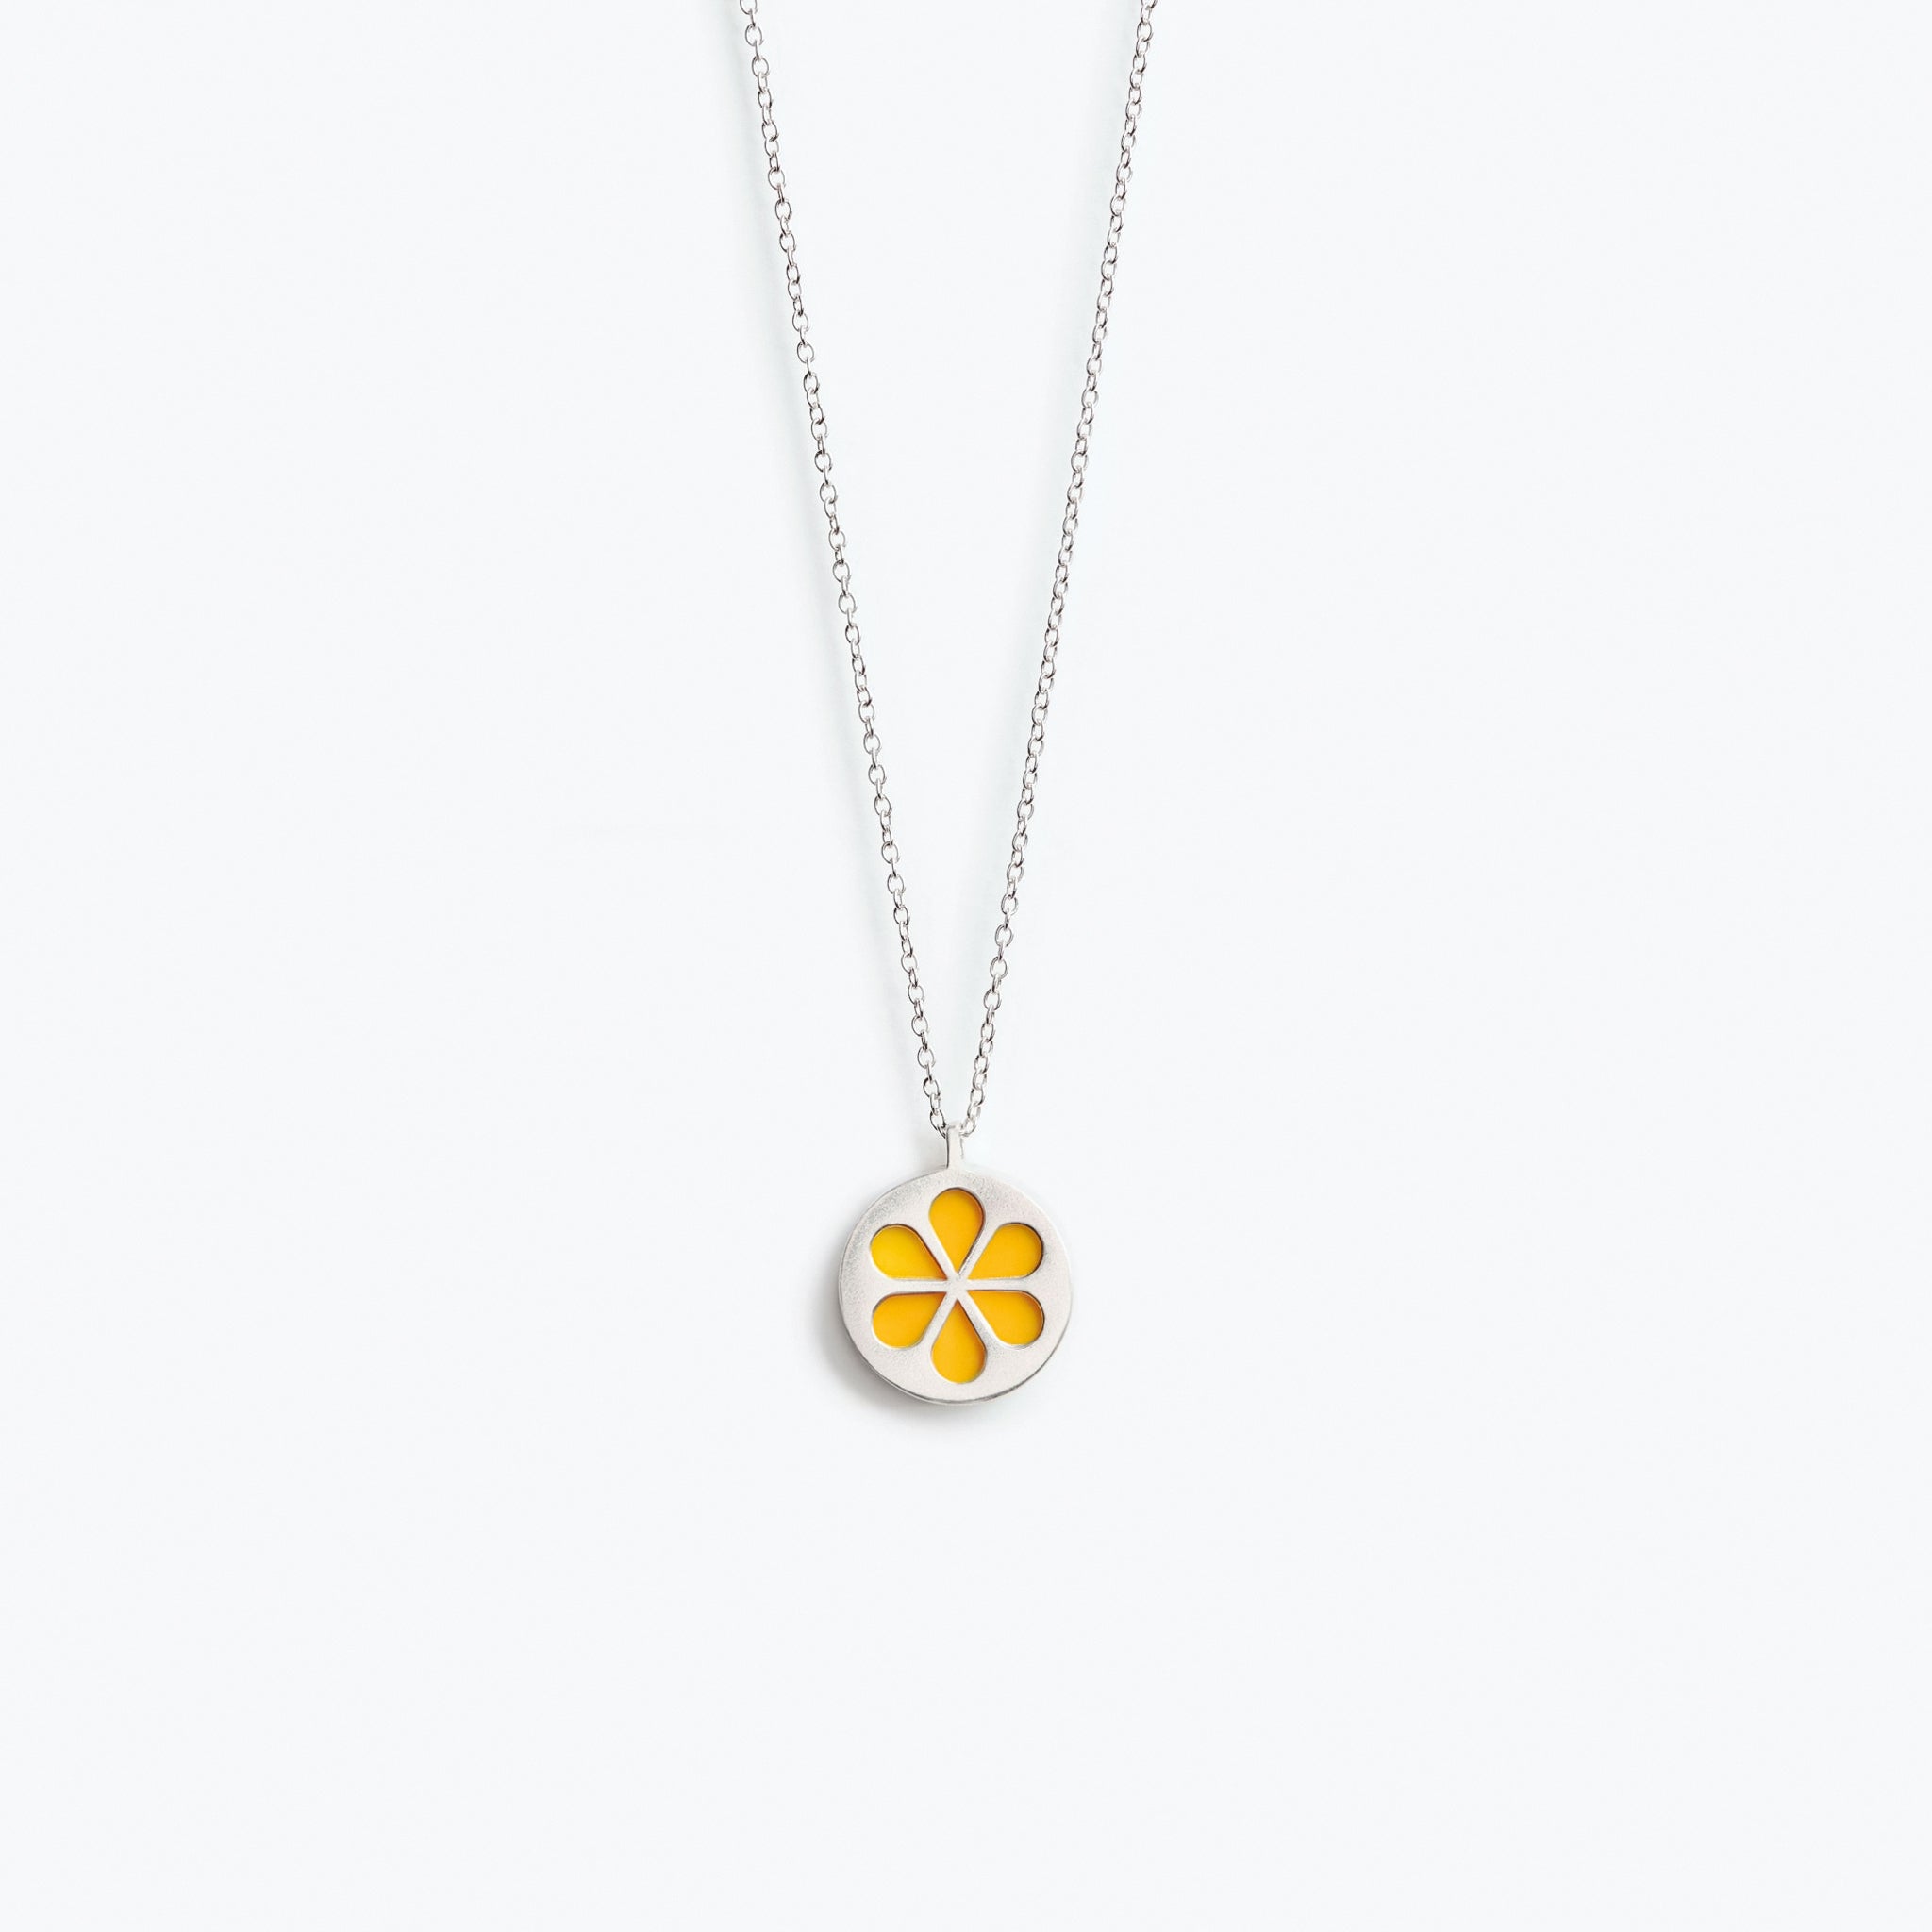 A simple orange flower pendant necklace, mounted on a fine trace chain.